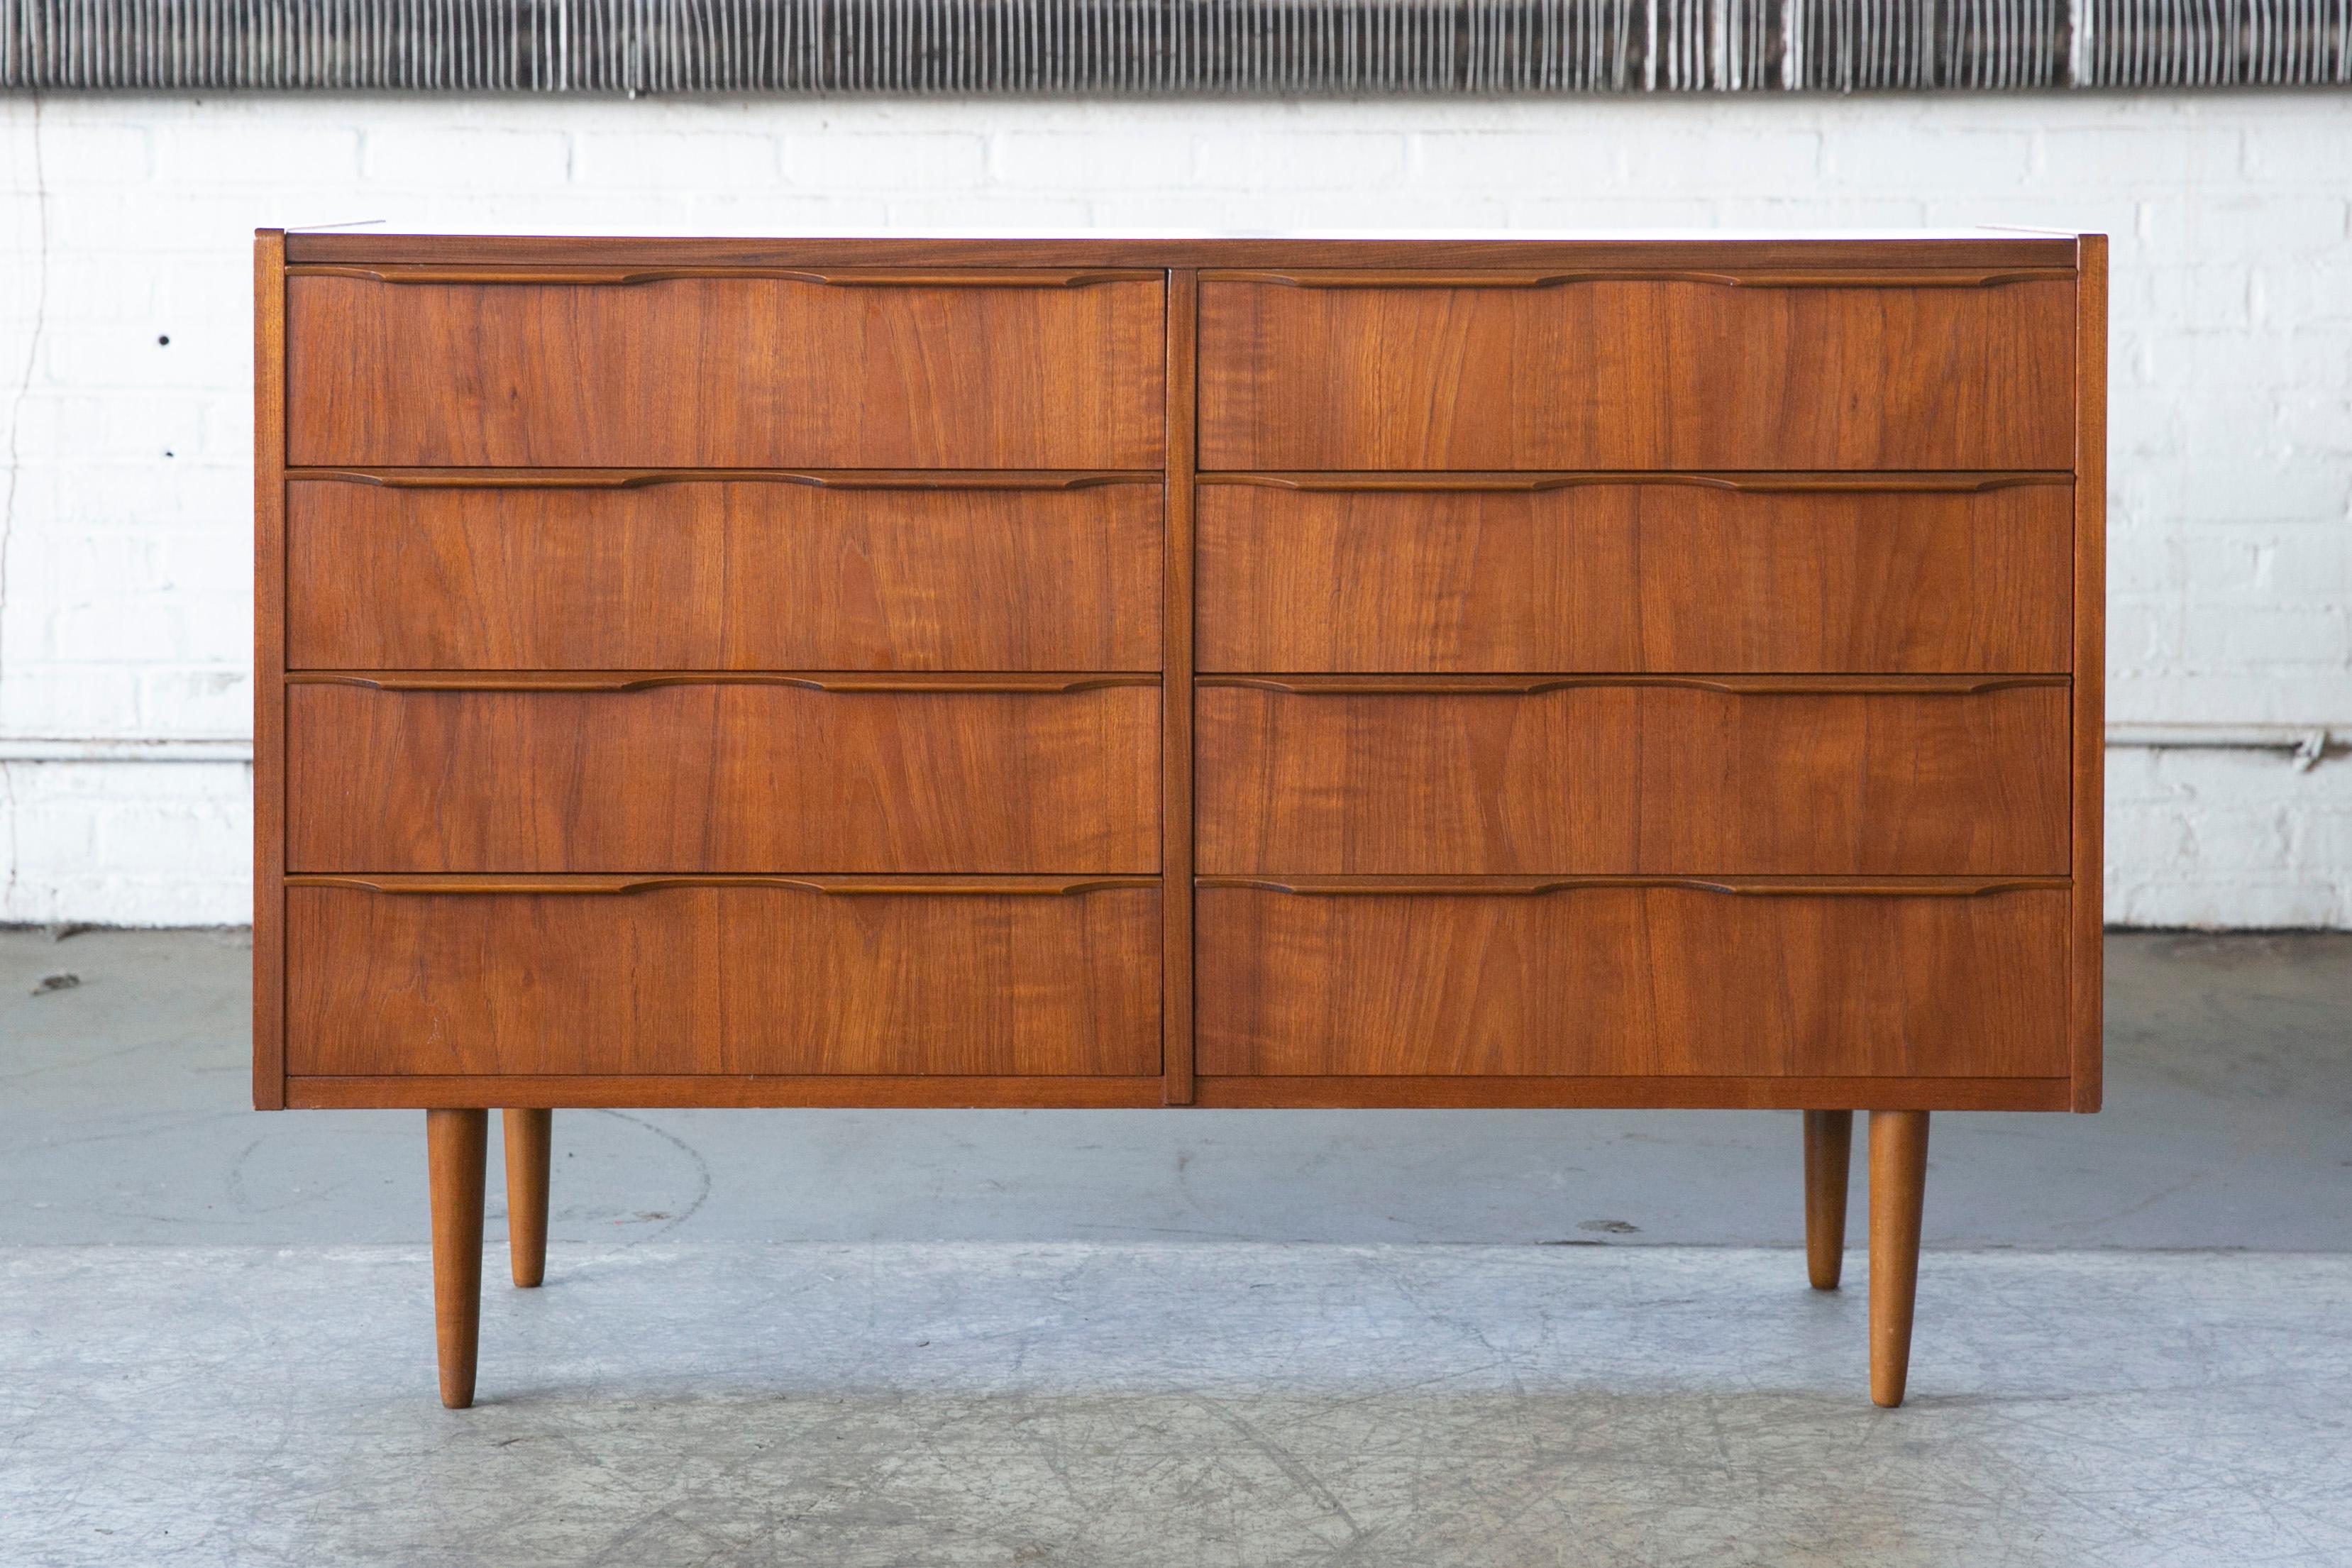 Rare to find 1960s Danish modern teak double dresser. Nice bookmatched wood grain. Drawers are constructed with dovetail joinery and are complimented by the finely carved hand pulls giving this simple dresser an elegant touch. Tapered teak wood legs